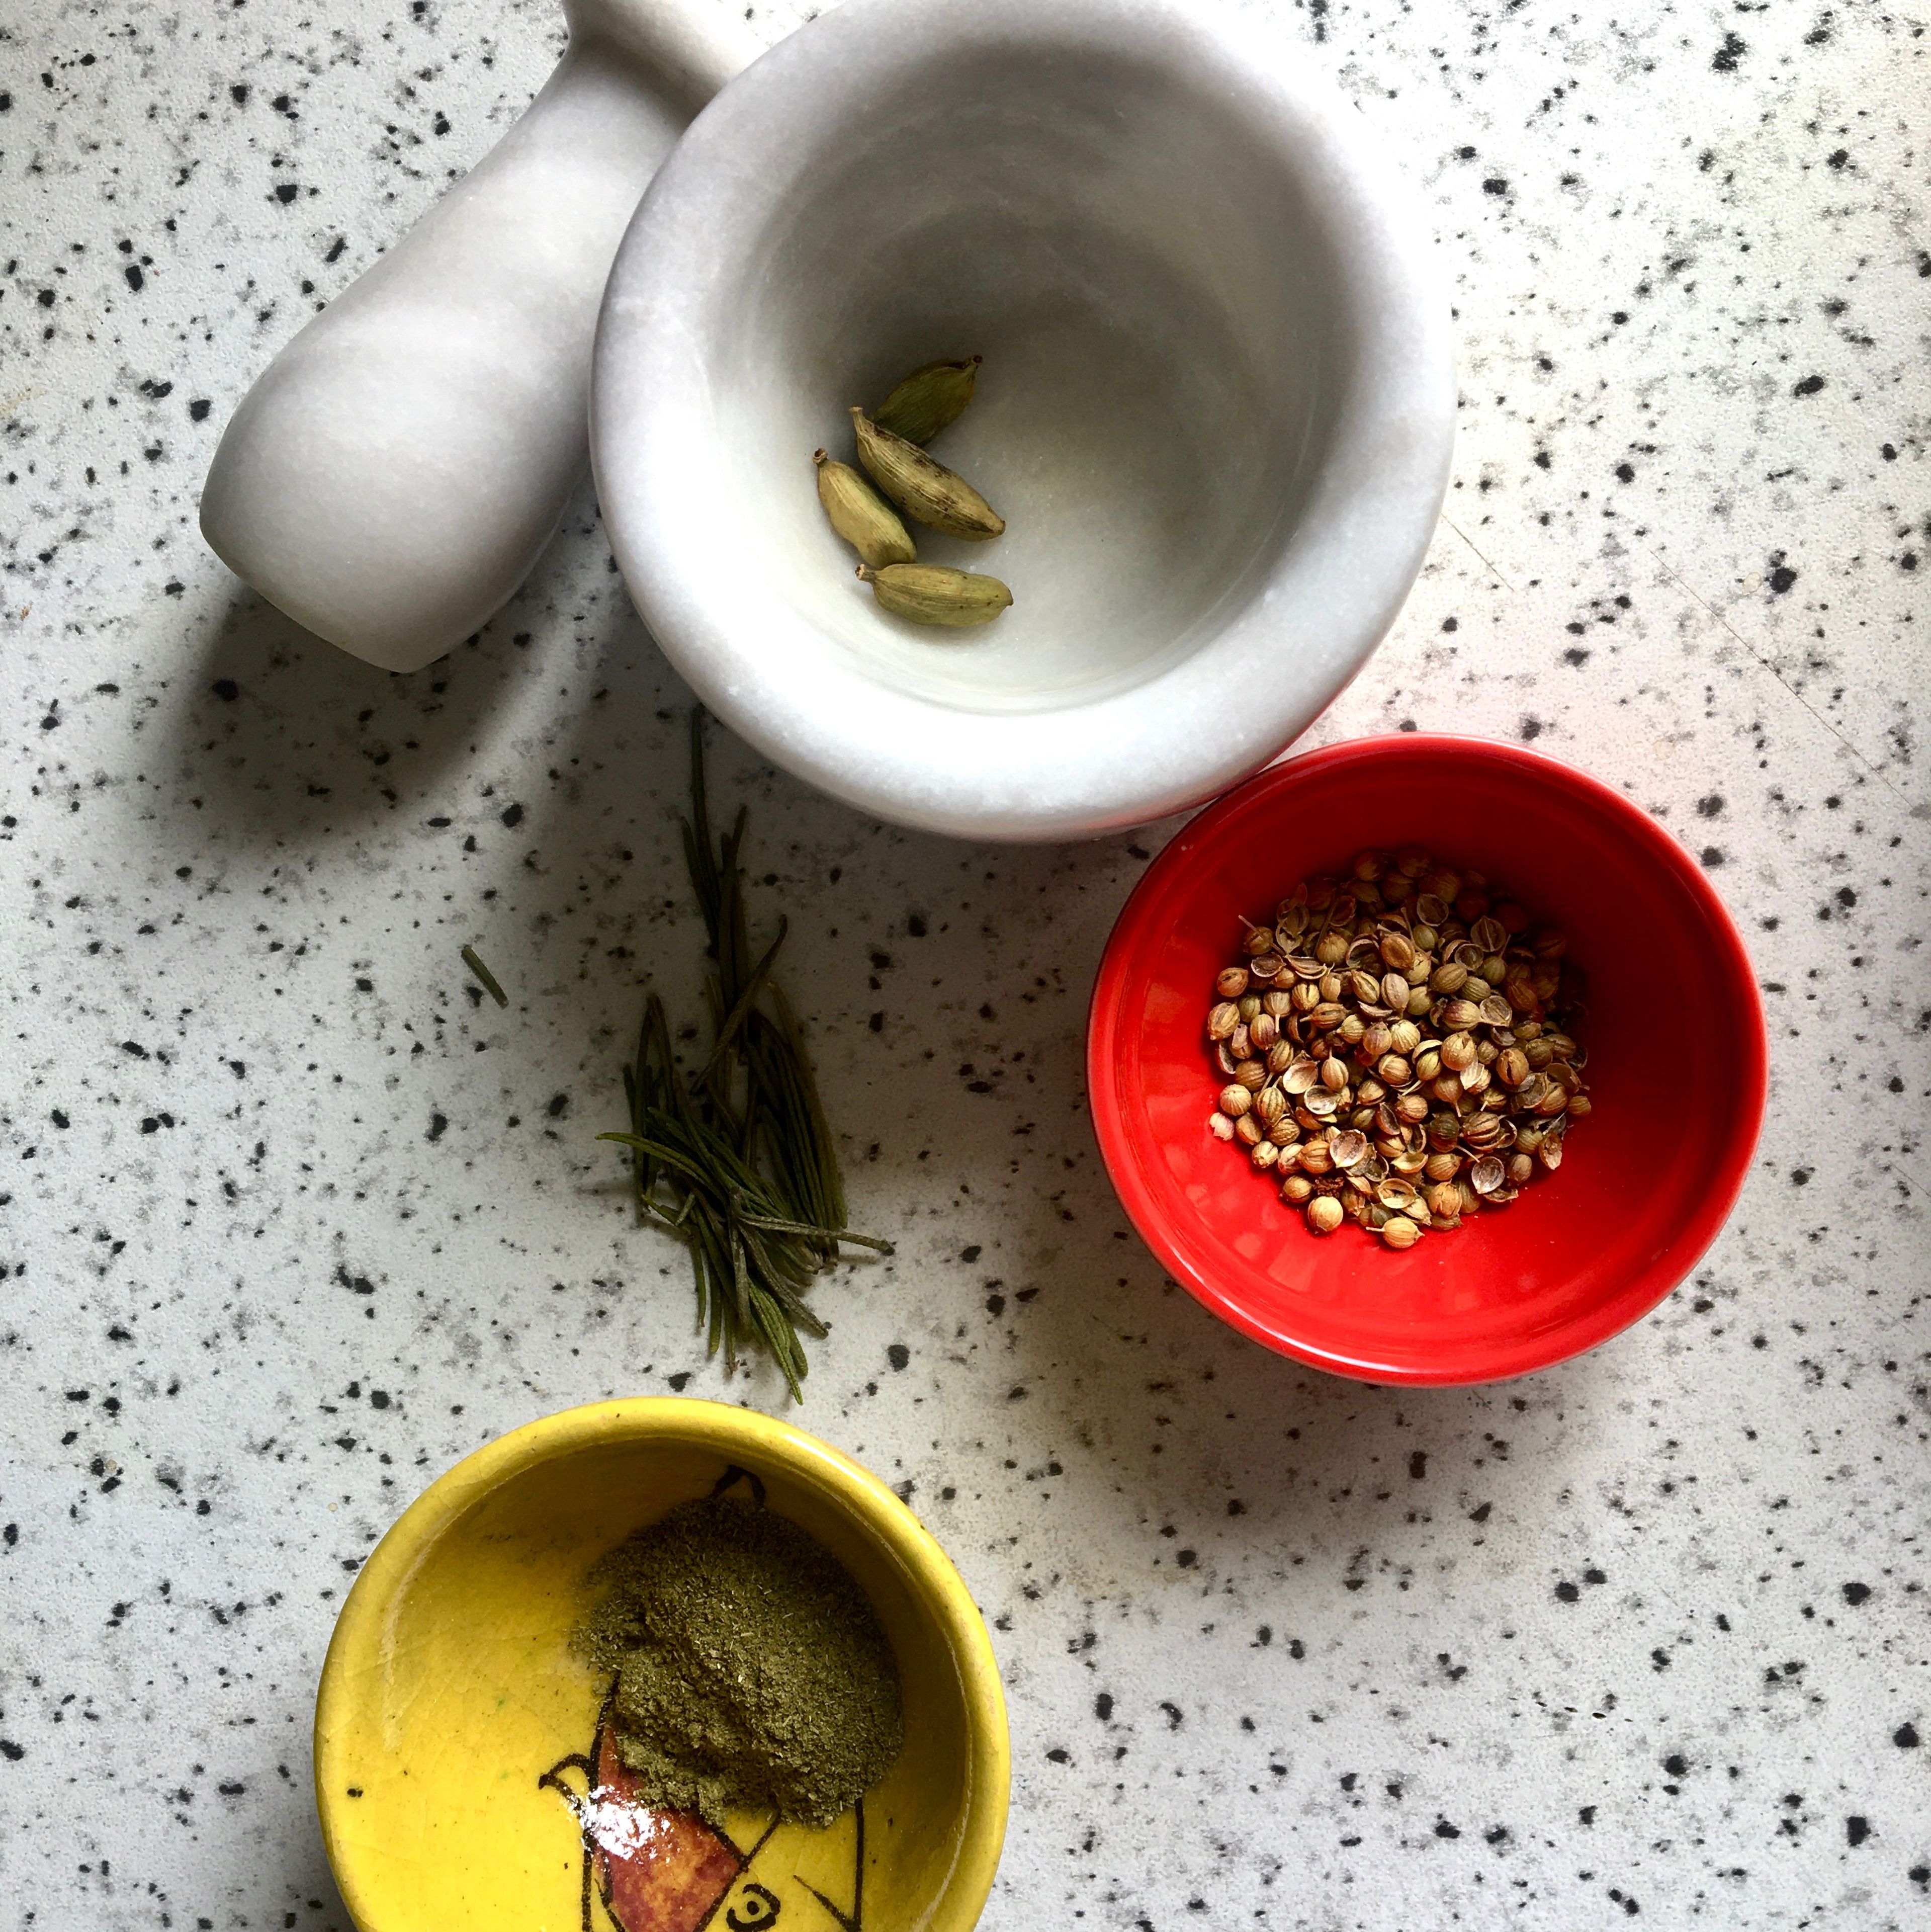 Finely grind together the cardamom pods, coriander seeds, dried rosemary and mint. Add the flax eggs and spices into the mixture. Whisk well, starting from low speed to the highest.